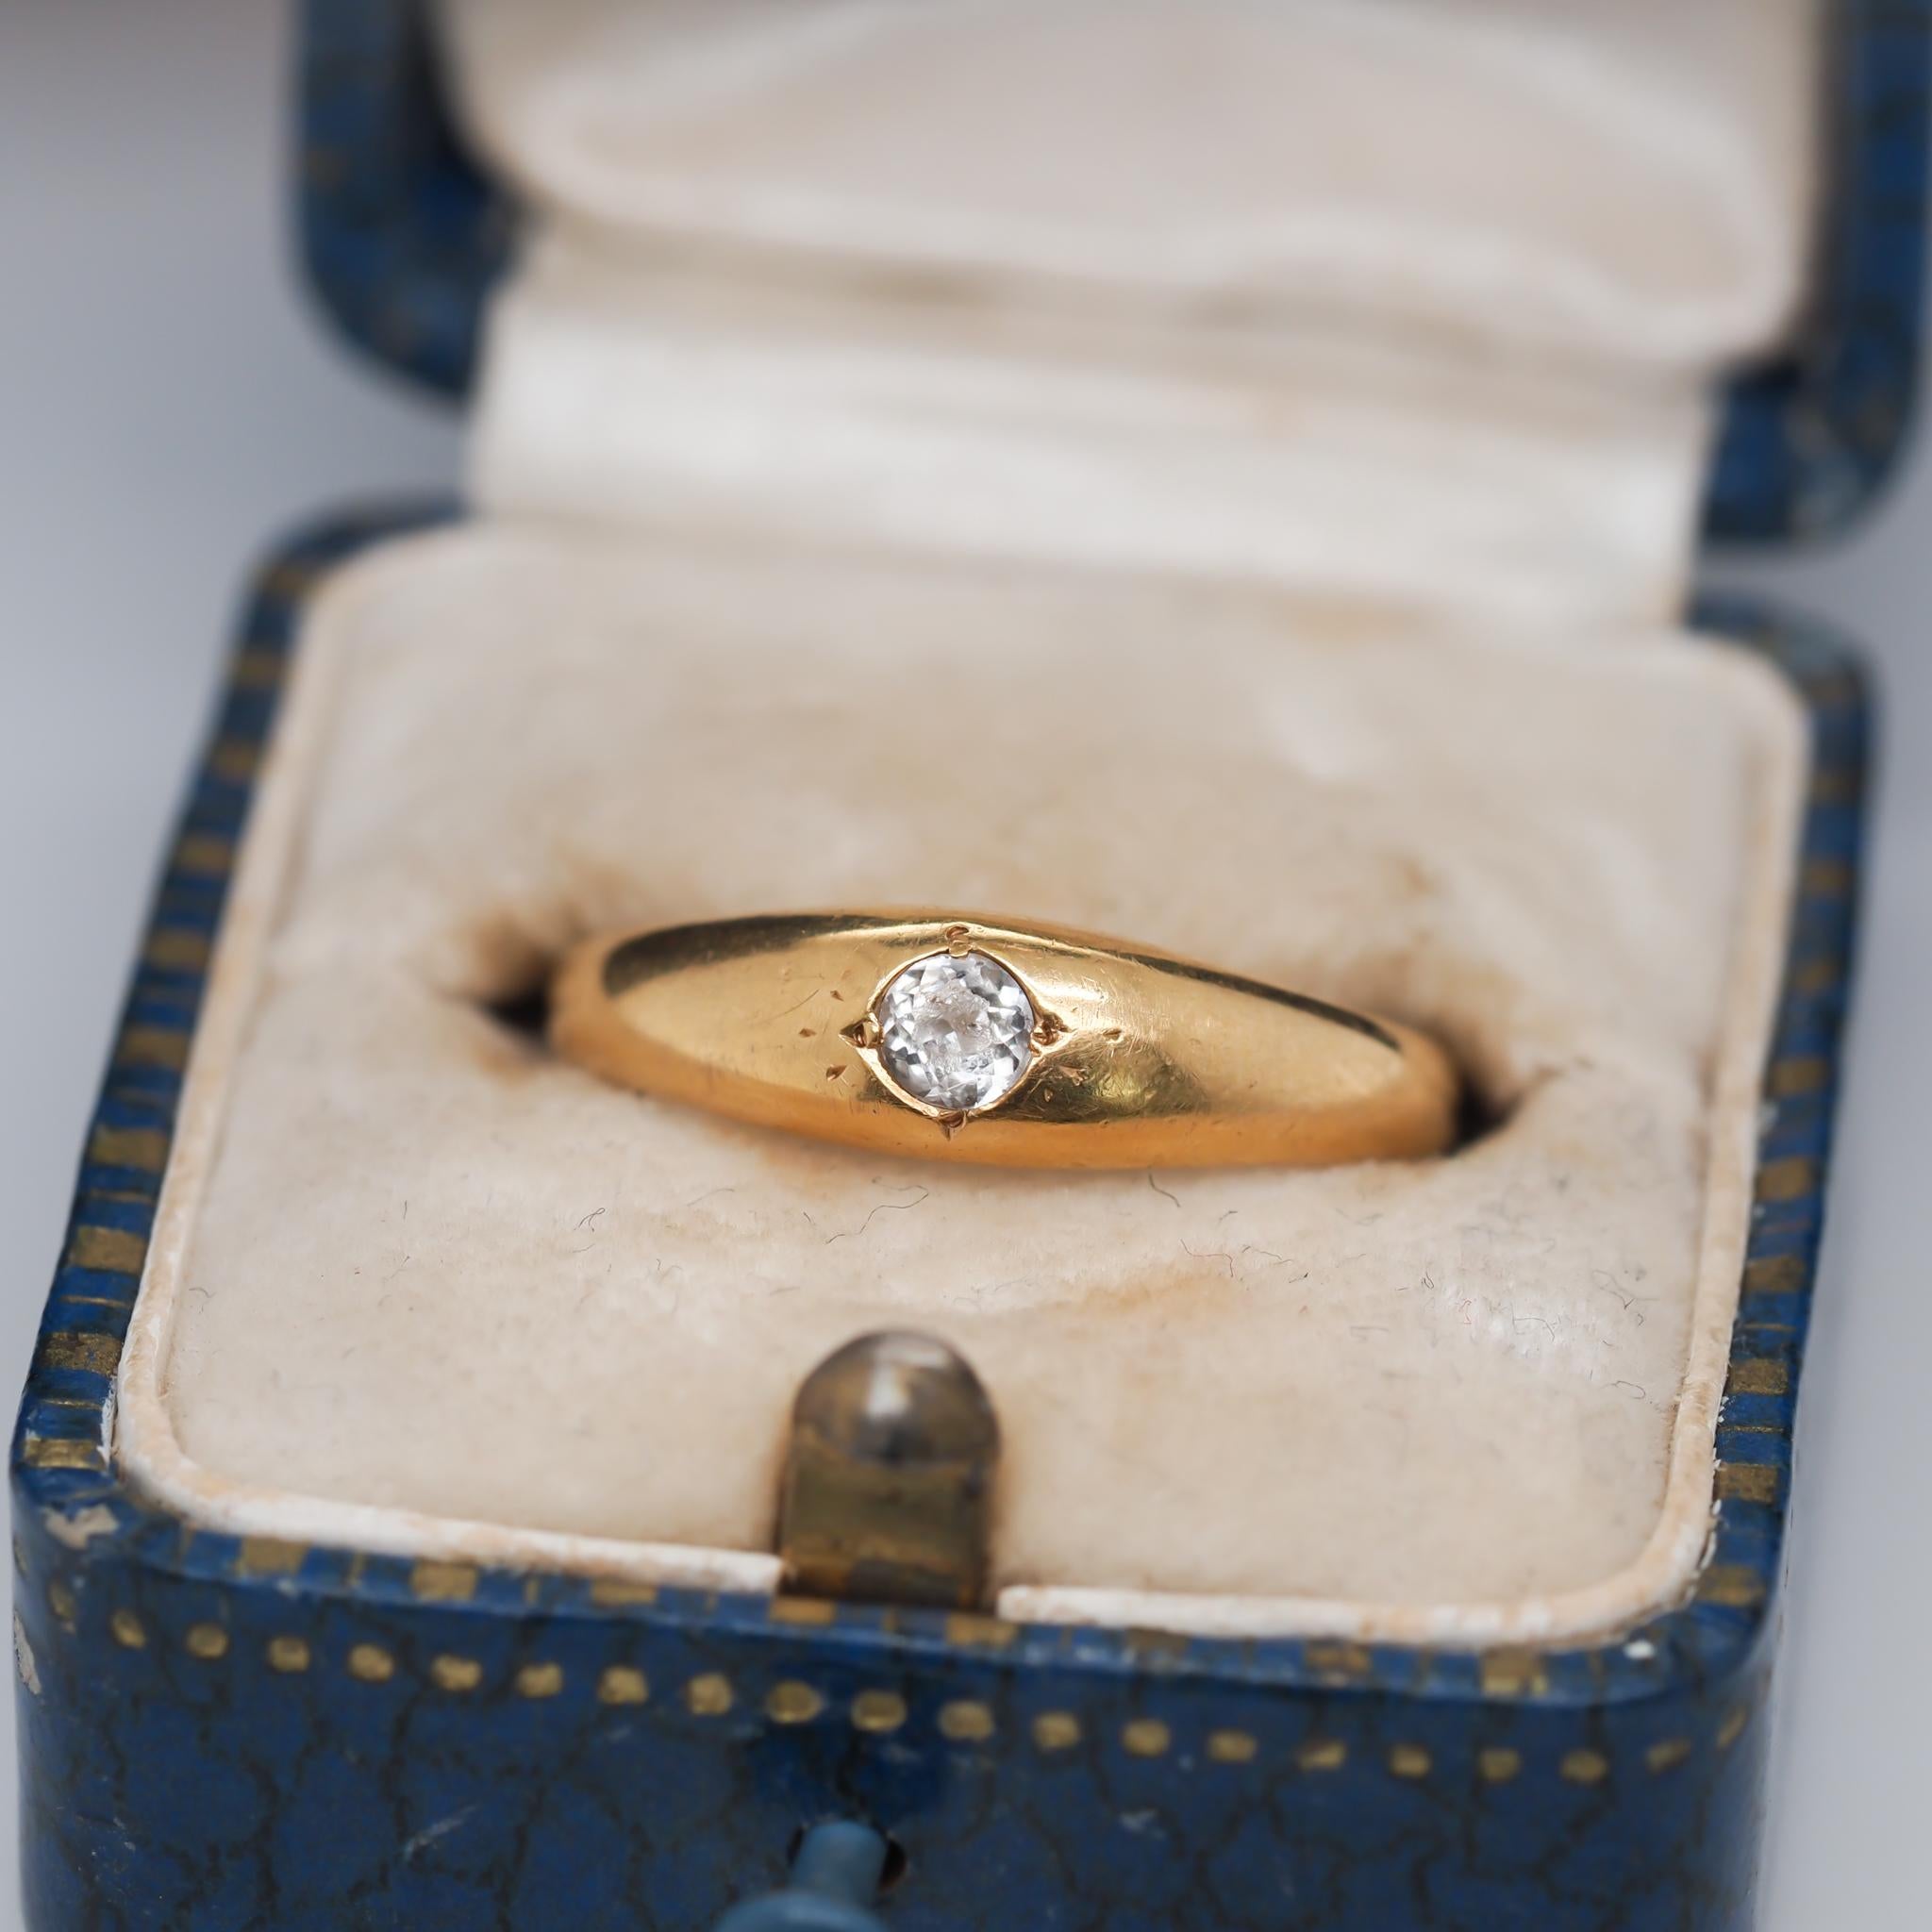 Ring Size: 6.25
Metal Type: 18k Yellow Gold [Hallmarked, and Tested]
Weight:  3.1 grams

Center Stone: White Sapphire (Faceted Cut)

Band Width: 2.5mm
Condition:  Excellent